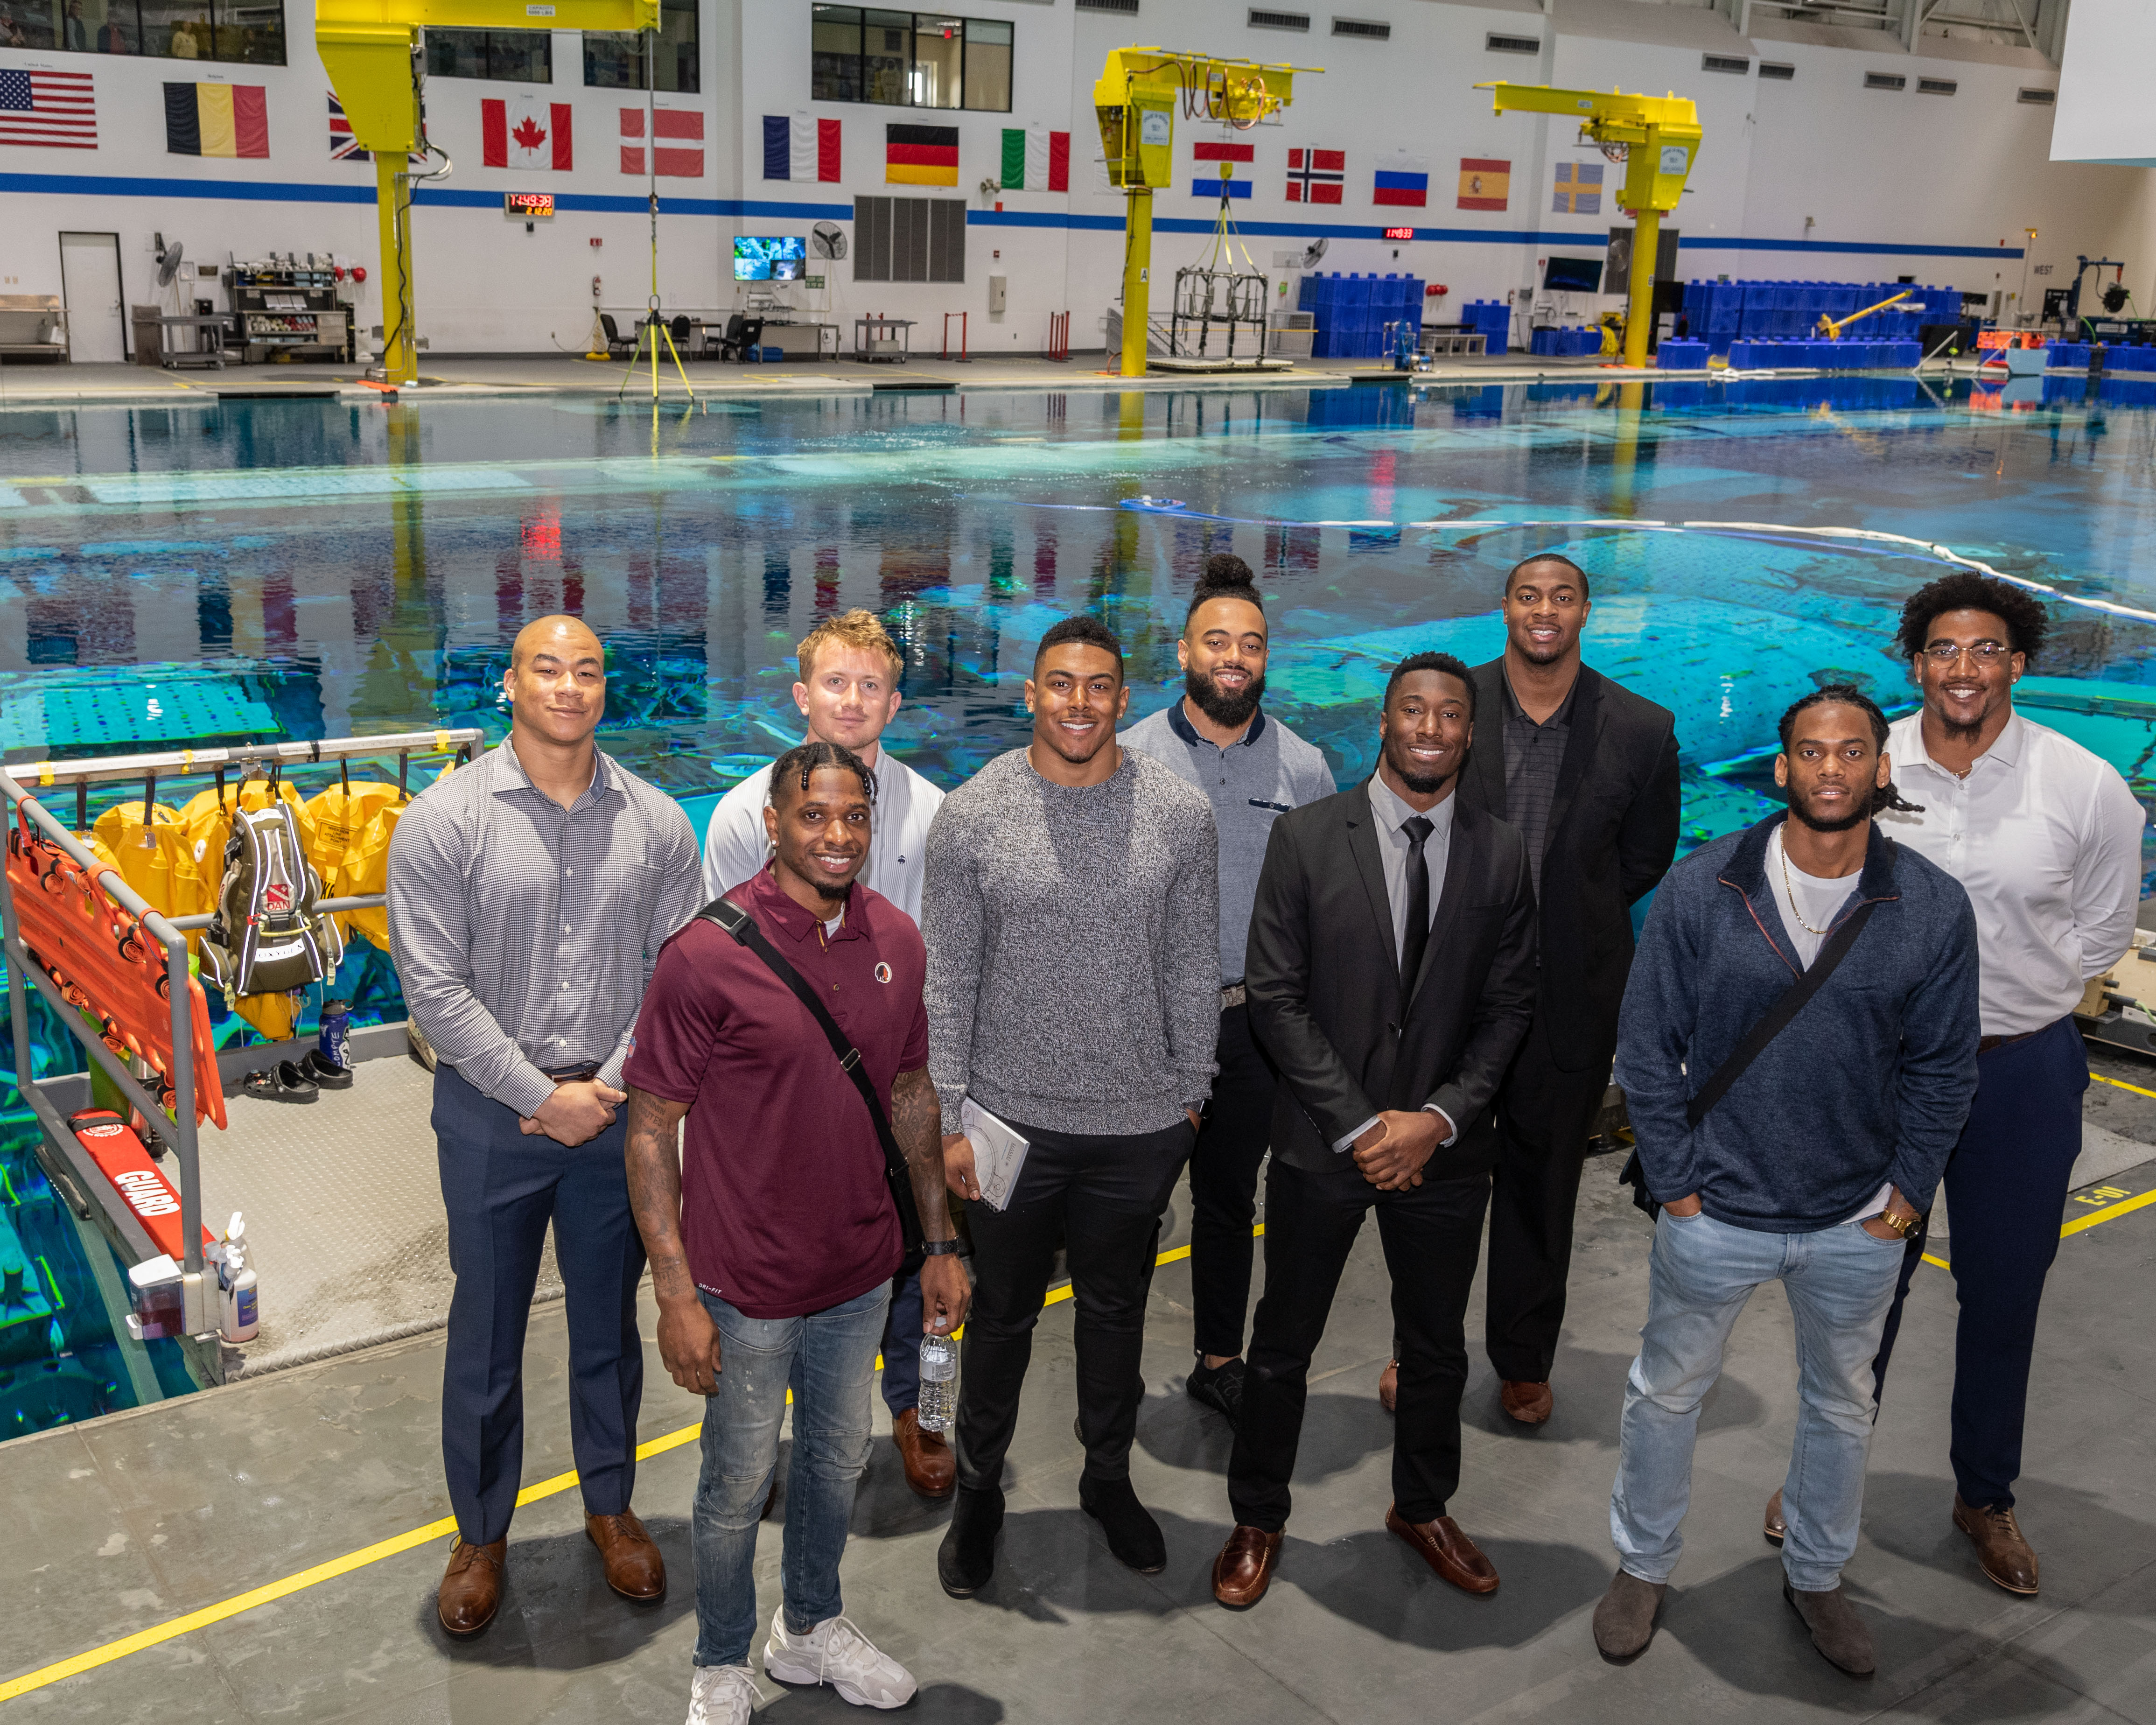 Attendees of the second NASA Commercialization Training Camp toured facilities at NASA’s Johnson Space Center in Houston, Texas. Cohort members included Aaron Wallace (back row, far left) and William Sweet (back row, second from right). Photo credit: NASA/Bill Stafford